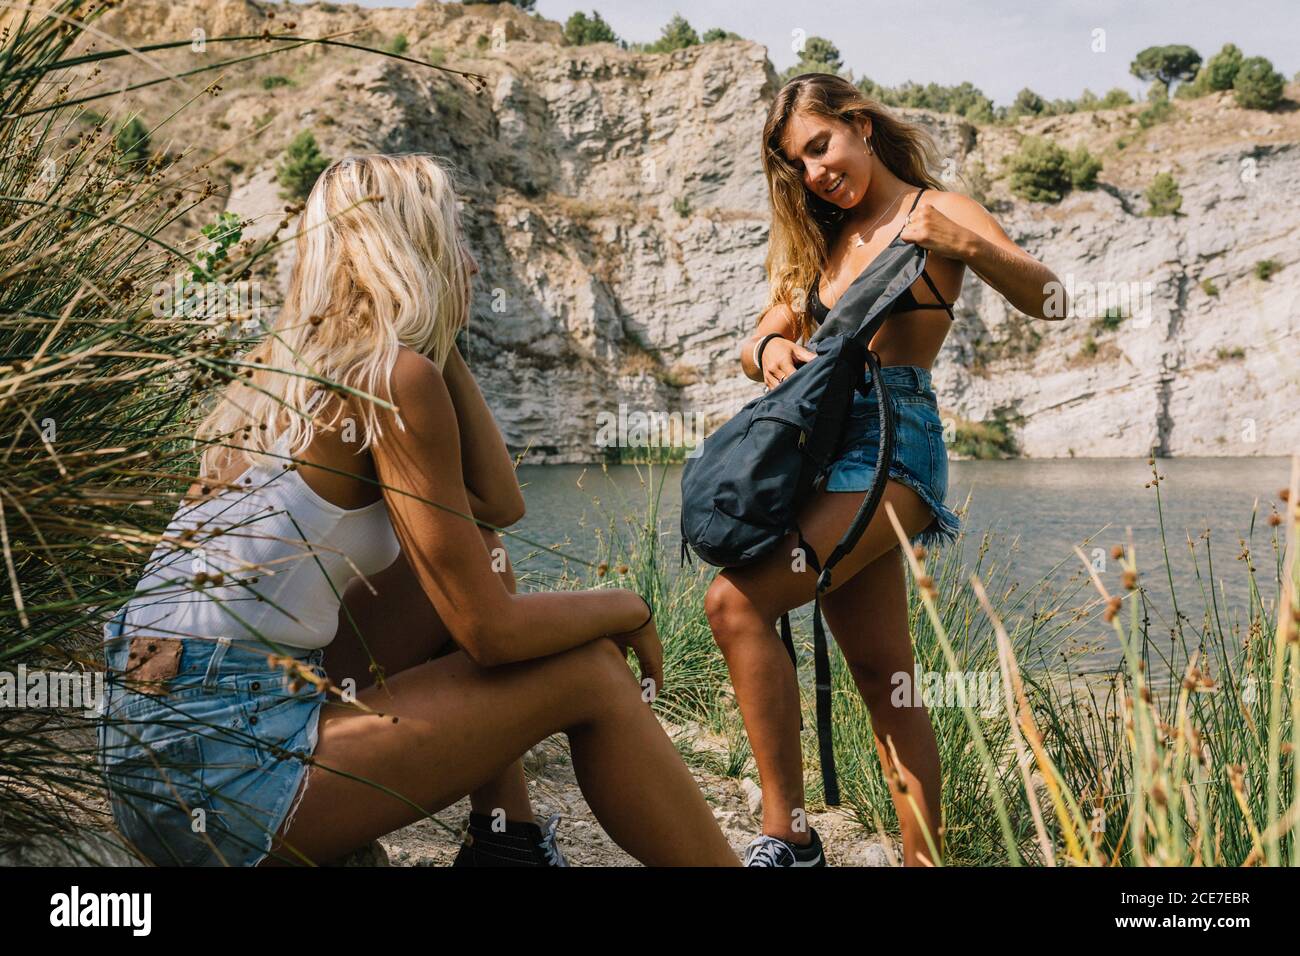 Content female tourists relaxing together on stony shore near lake during summer vacation Stock Photo